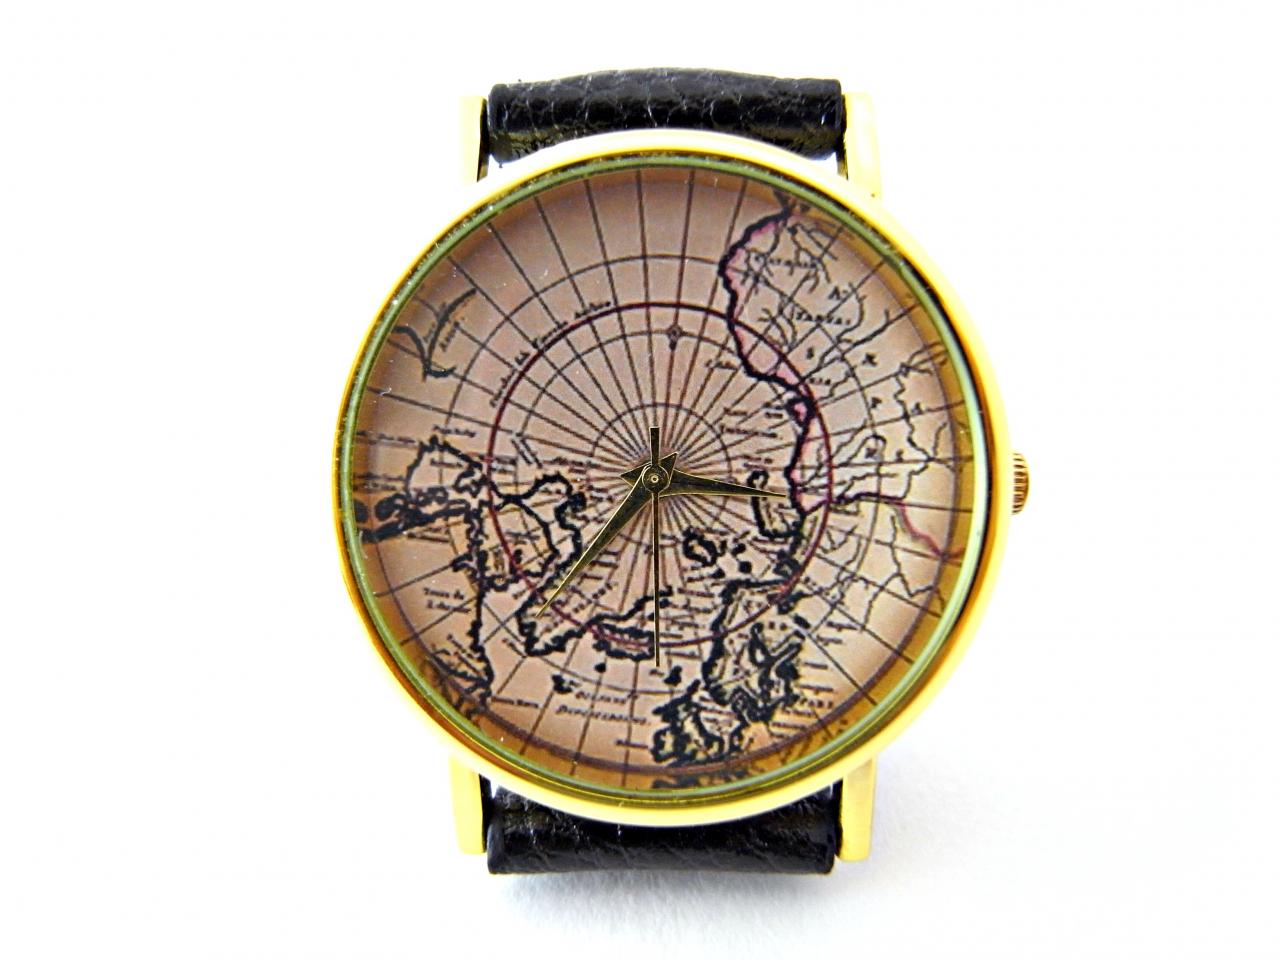 World Map Leather Wrist Watches, Woman Man Lady Unisex Watch, Genuine Leather Handmade Unique Watch #32